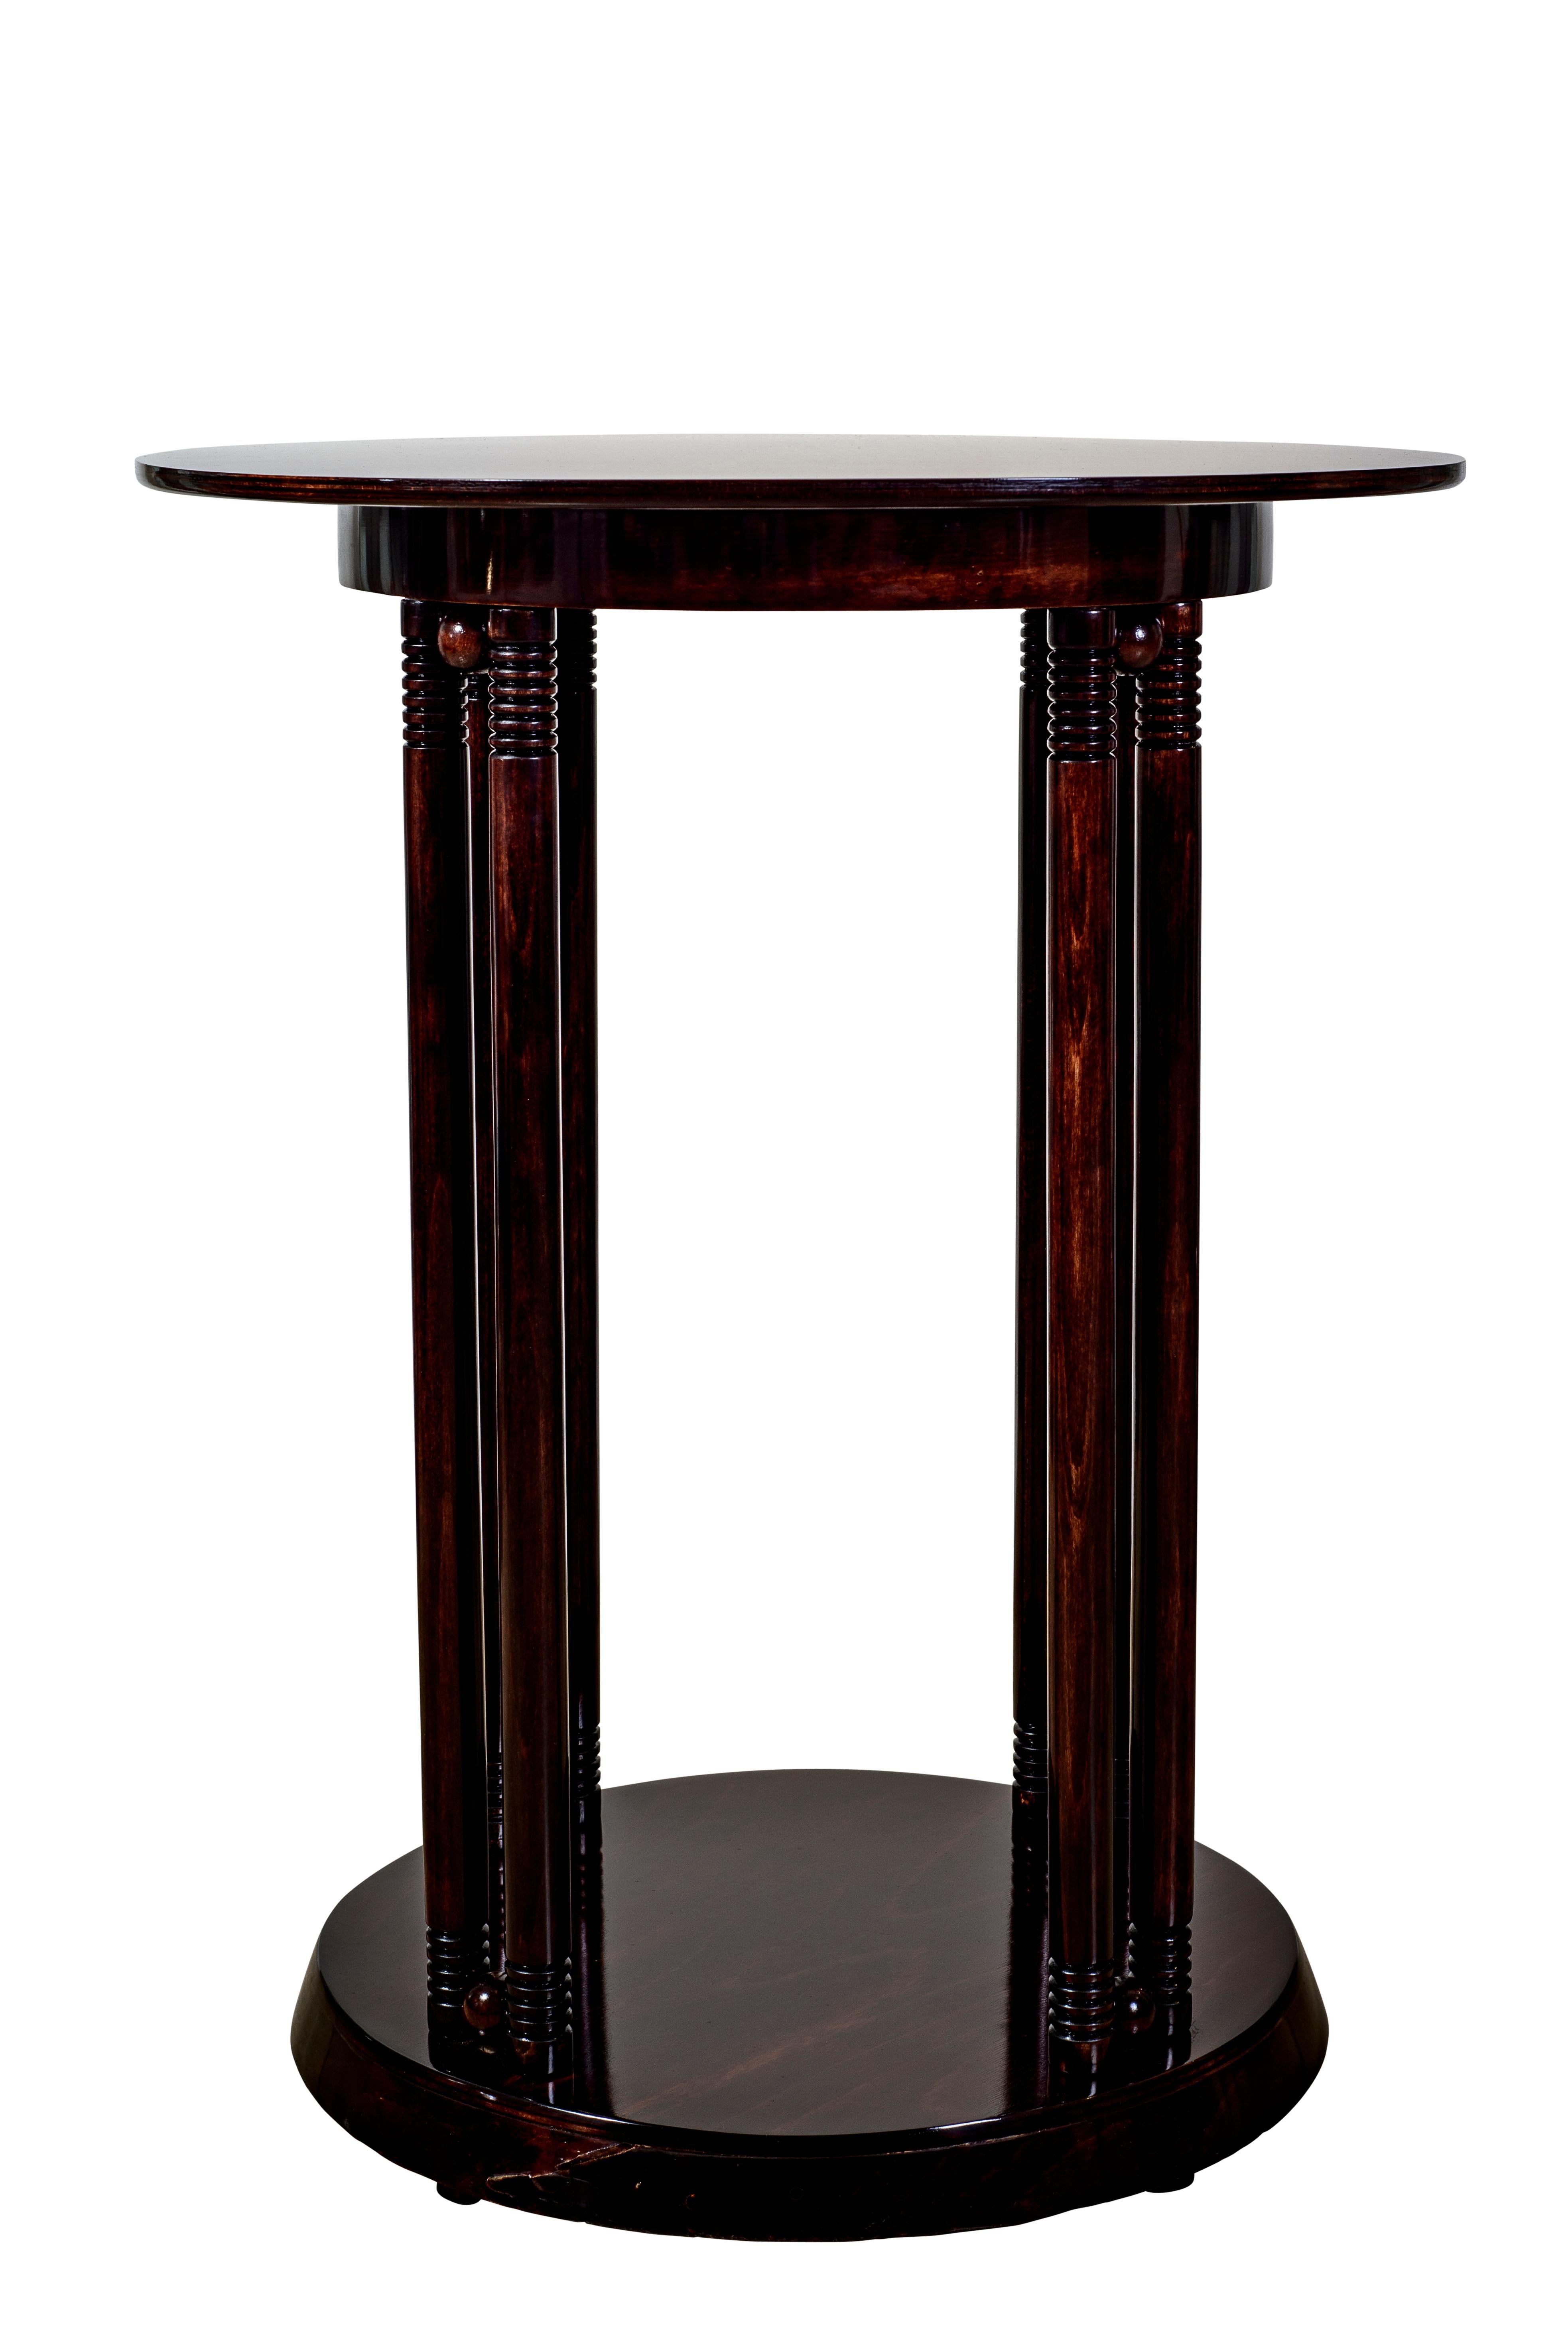 Wood Table Josef Hoffmann Gustav Siegel Austrian Jugendstil circa 1906 Jacob & Josef Kohn Bentwood

The Wiener Werkstatte experienced its most glamorous phase in the period around 1905. Many of the pieces created at that time were later part of